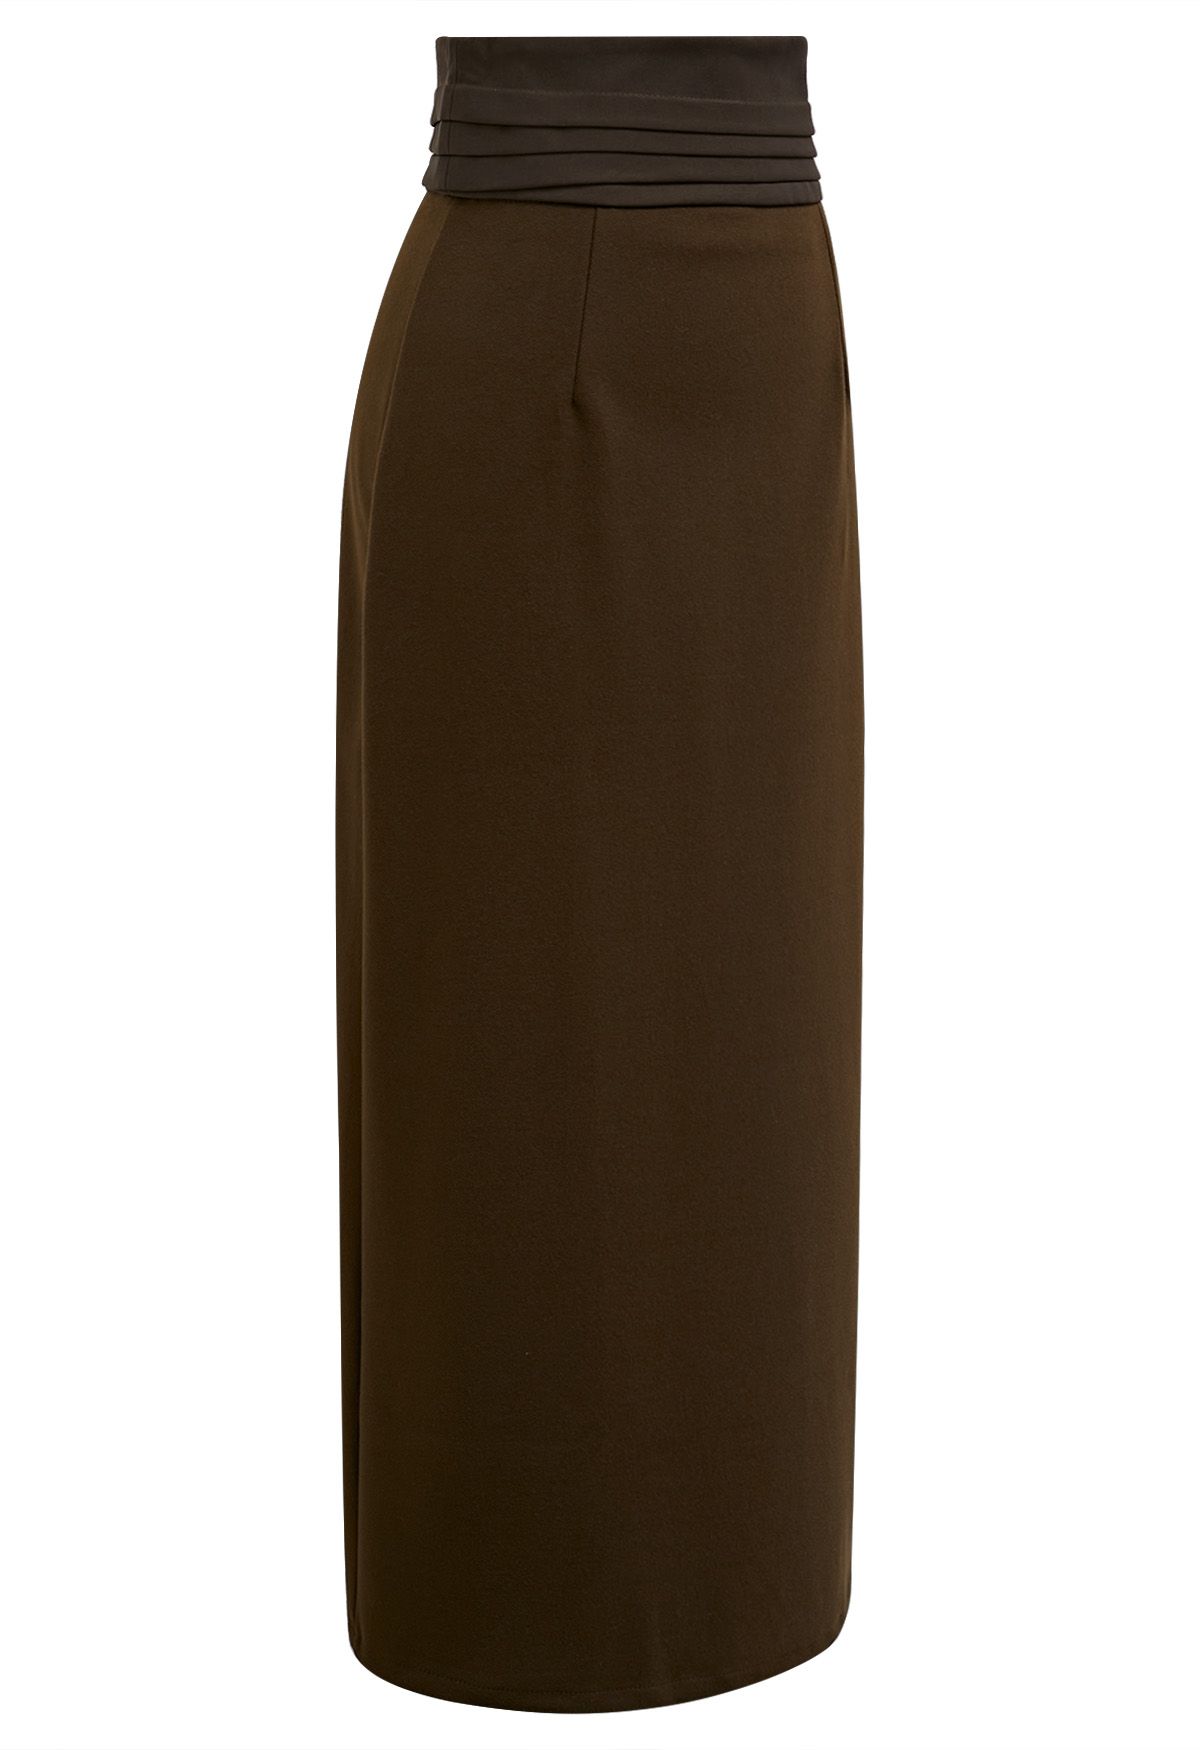 Pintuck High Waist Pencil Skirt in Olive - Retro, Indie and Unique Fashion